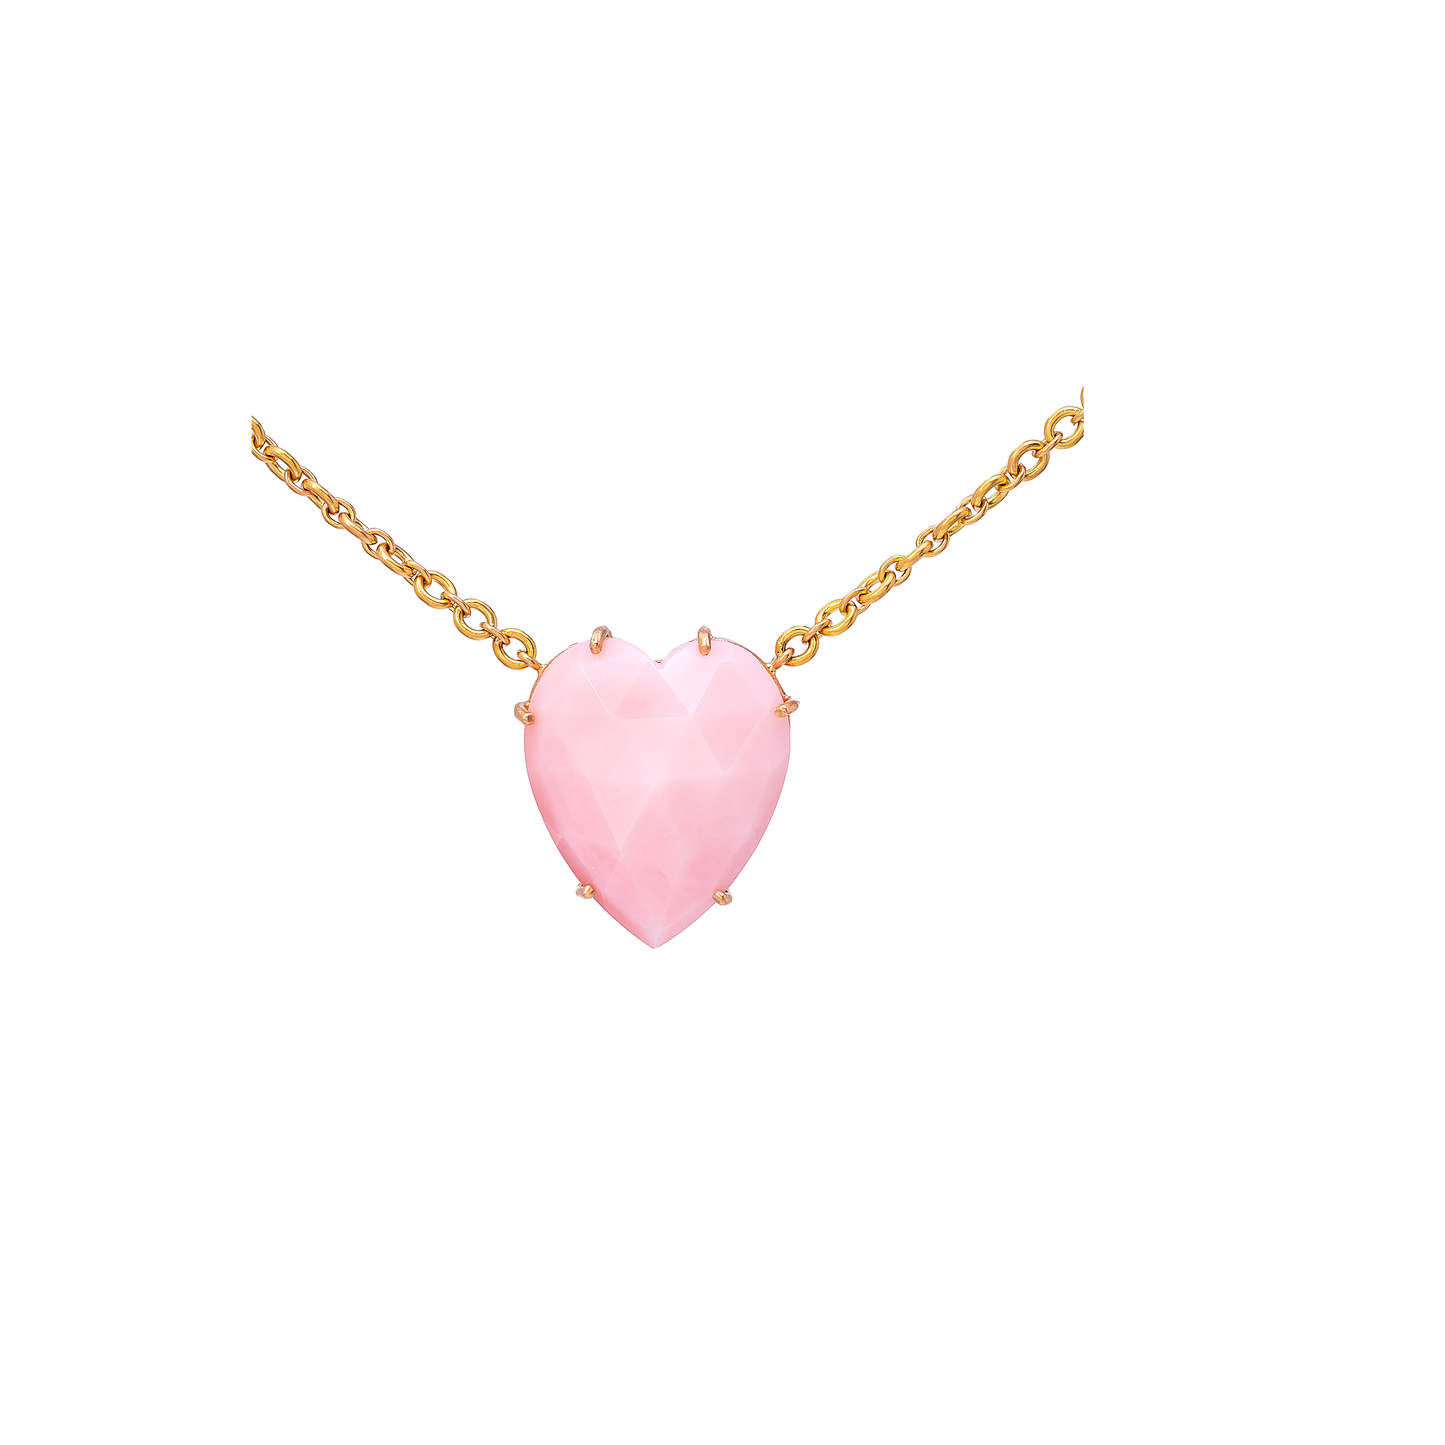 Irene Neuwirth Large 'Love' Pink Opal Necklace